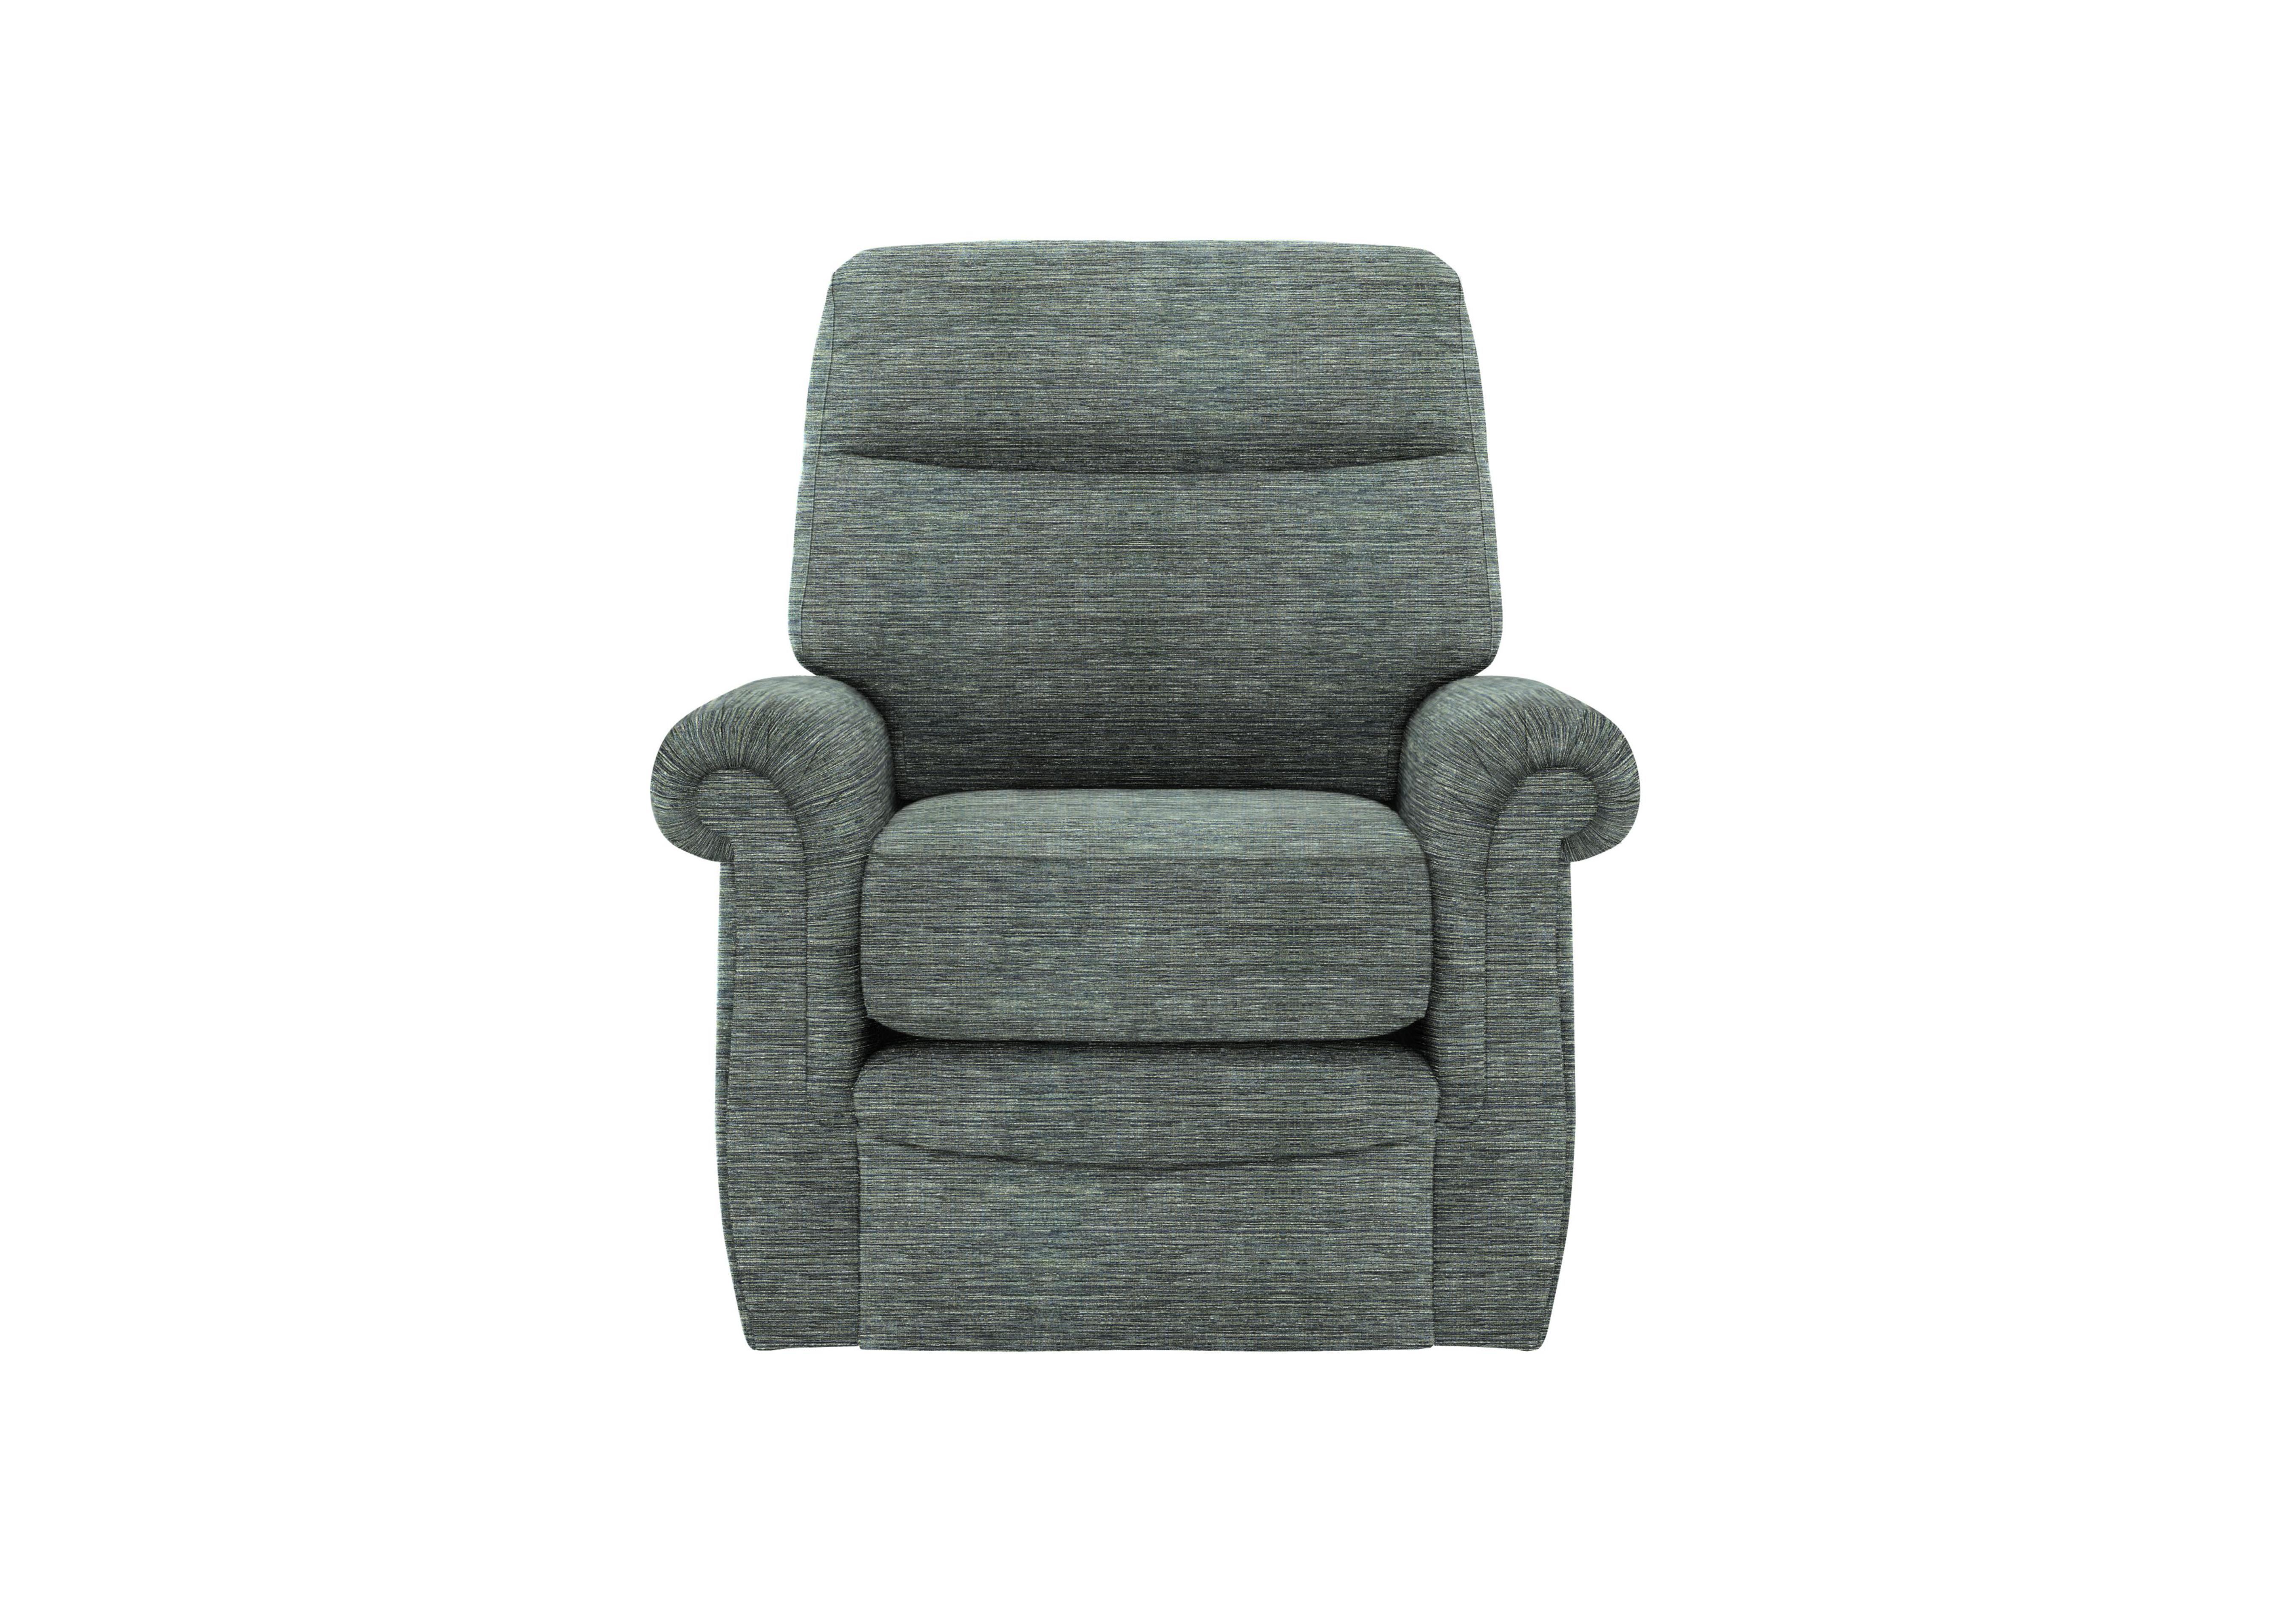 Avon Fabric Lift and Rise Armchair in B925 Waffle Marine on Furniture Village